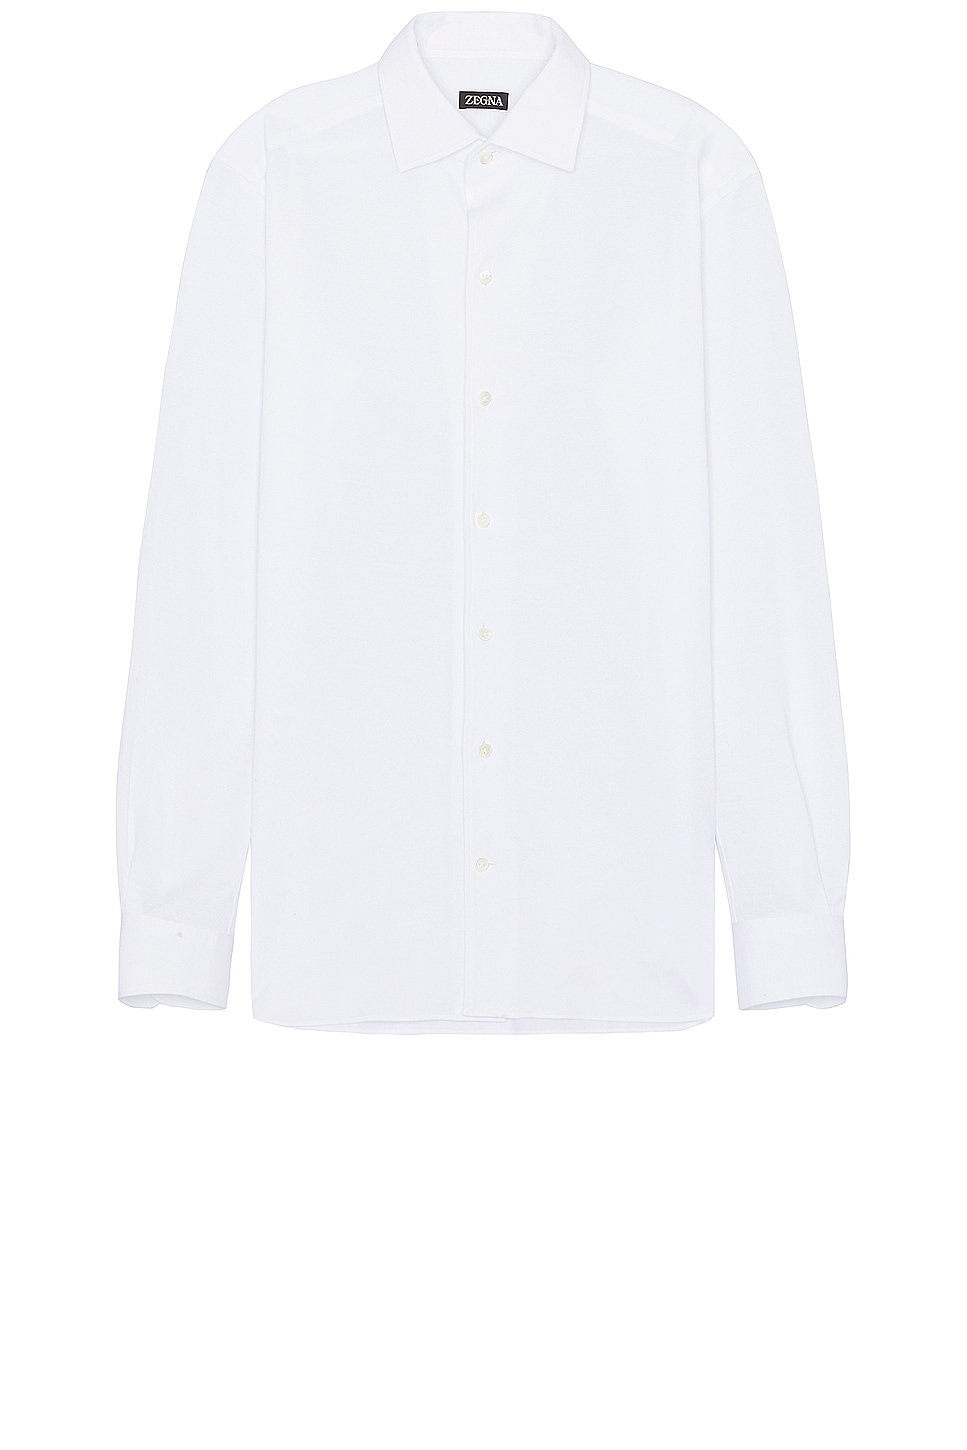 Image 1 of Zegna Pure Cotton Jersey Long Sleeve Button Down Shirt in White